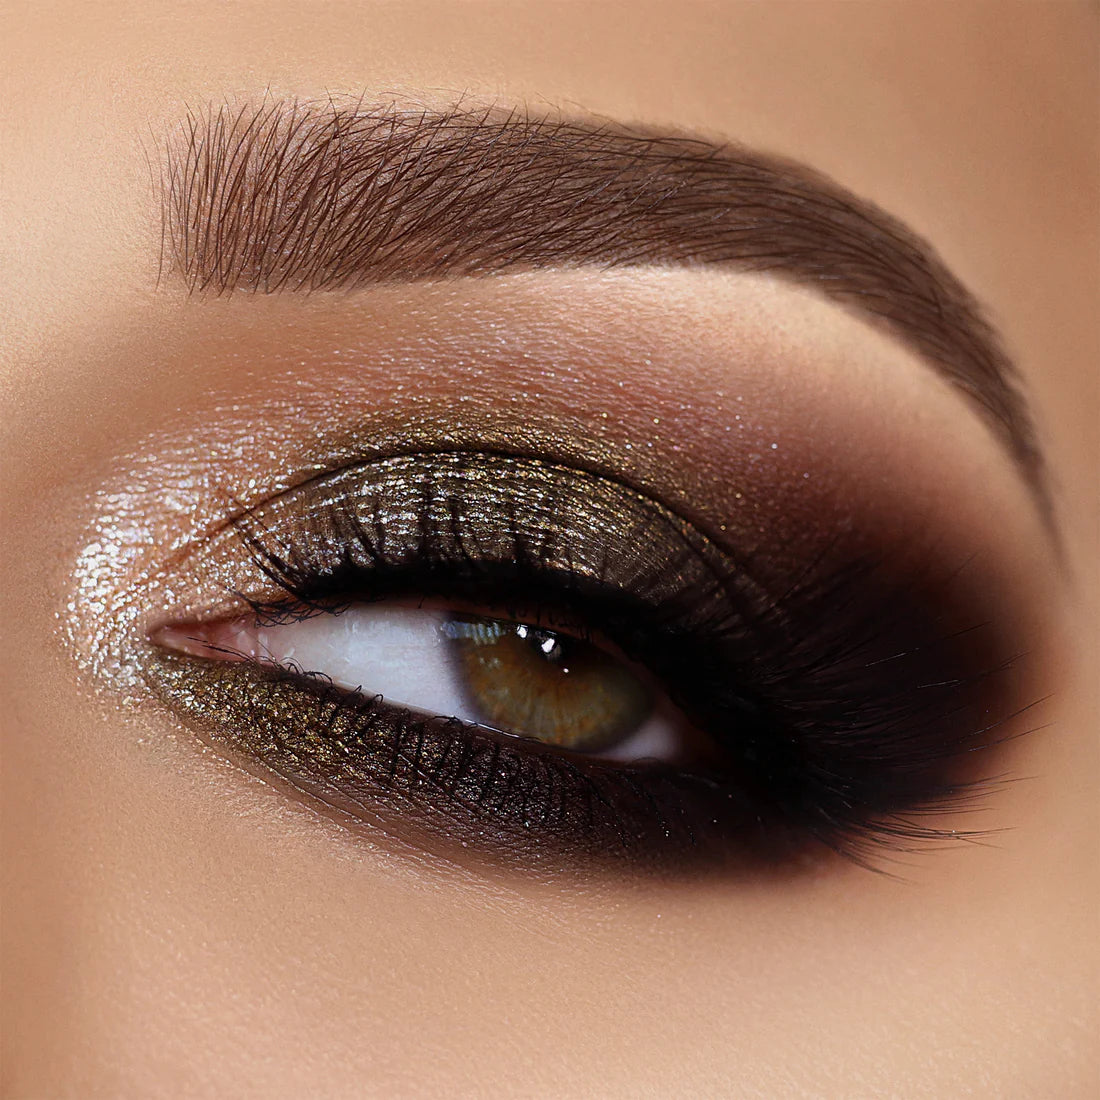 Load image into Gallery viewer, Pat McGrath Mini Eye Shadow Palette Sublime Smoke
